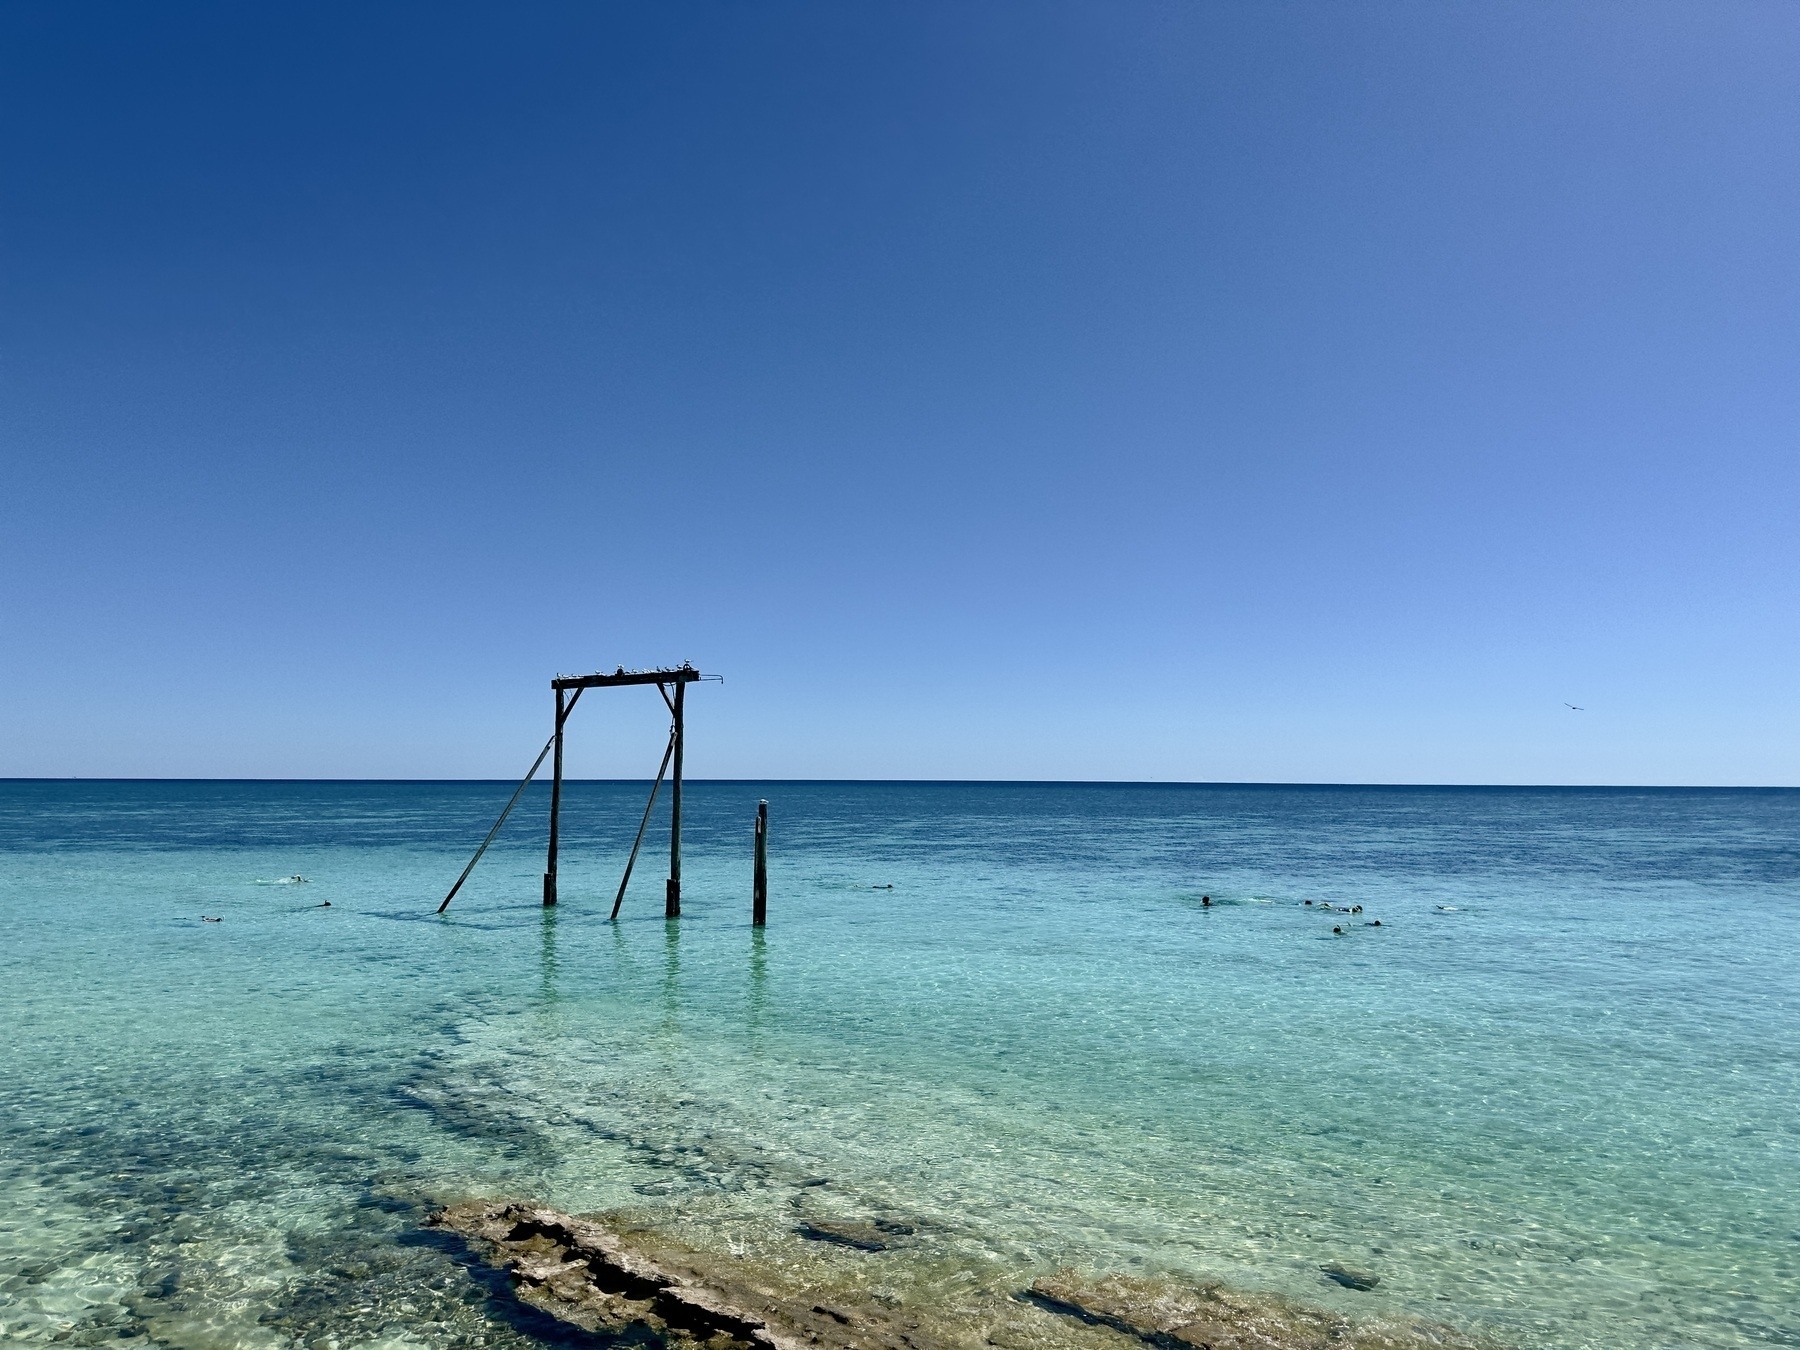 Looking out across the blue and green water of Heron Island, toward the horizon and clear blue sky, snorkelers swimming around a disused wooden frame.